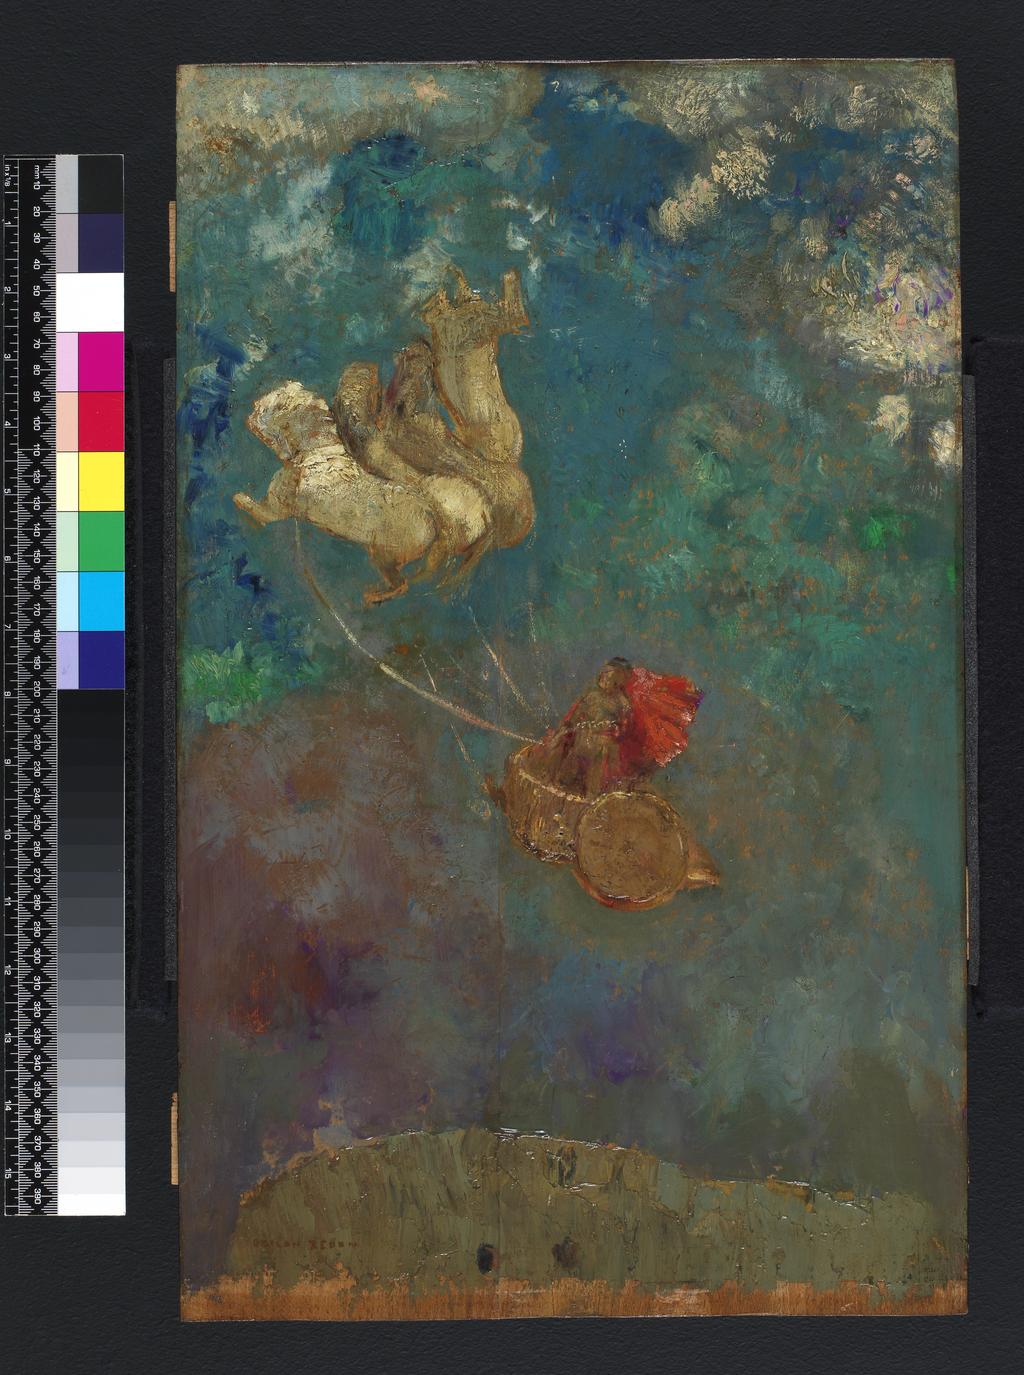 An image of Le Char d' Apollon. Translated title: The Chariot of Apollo. Redon, Odilon (French, 1840-1916). Oil on panel, height 476 mm, width 299 mm, 1907-1910.